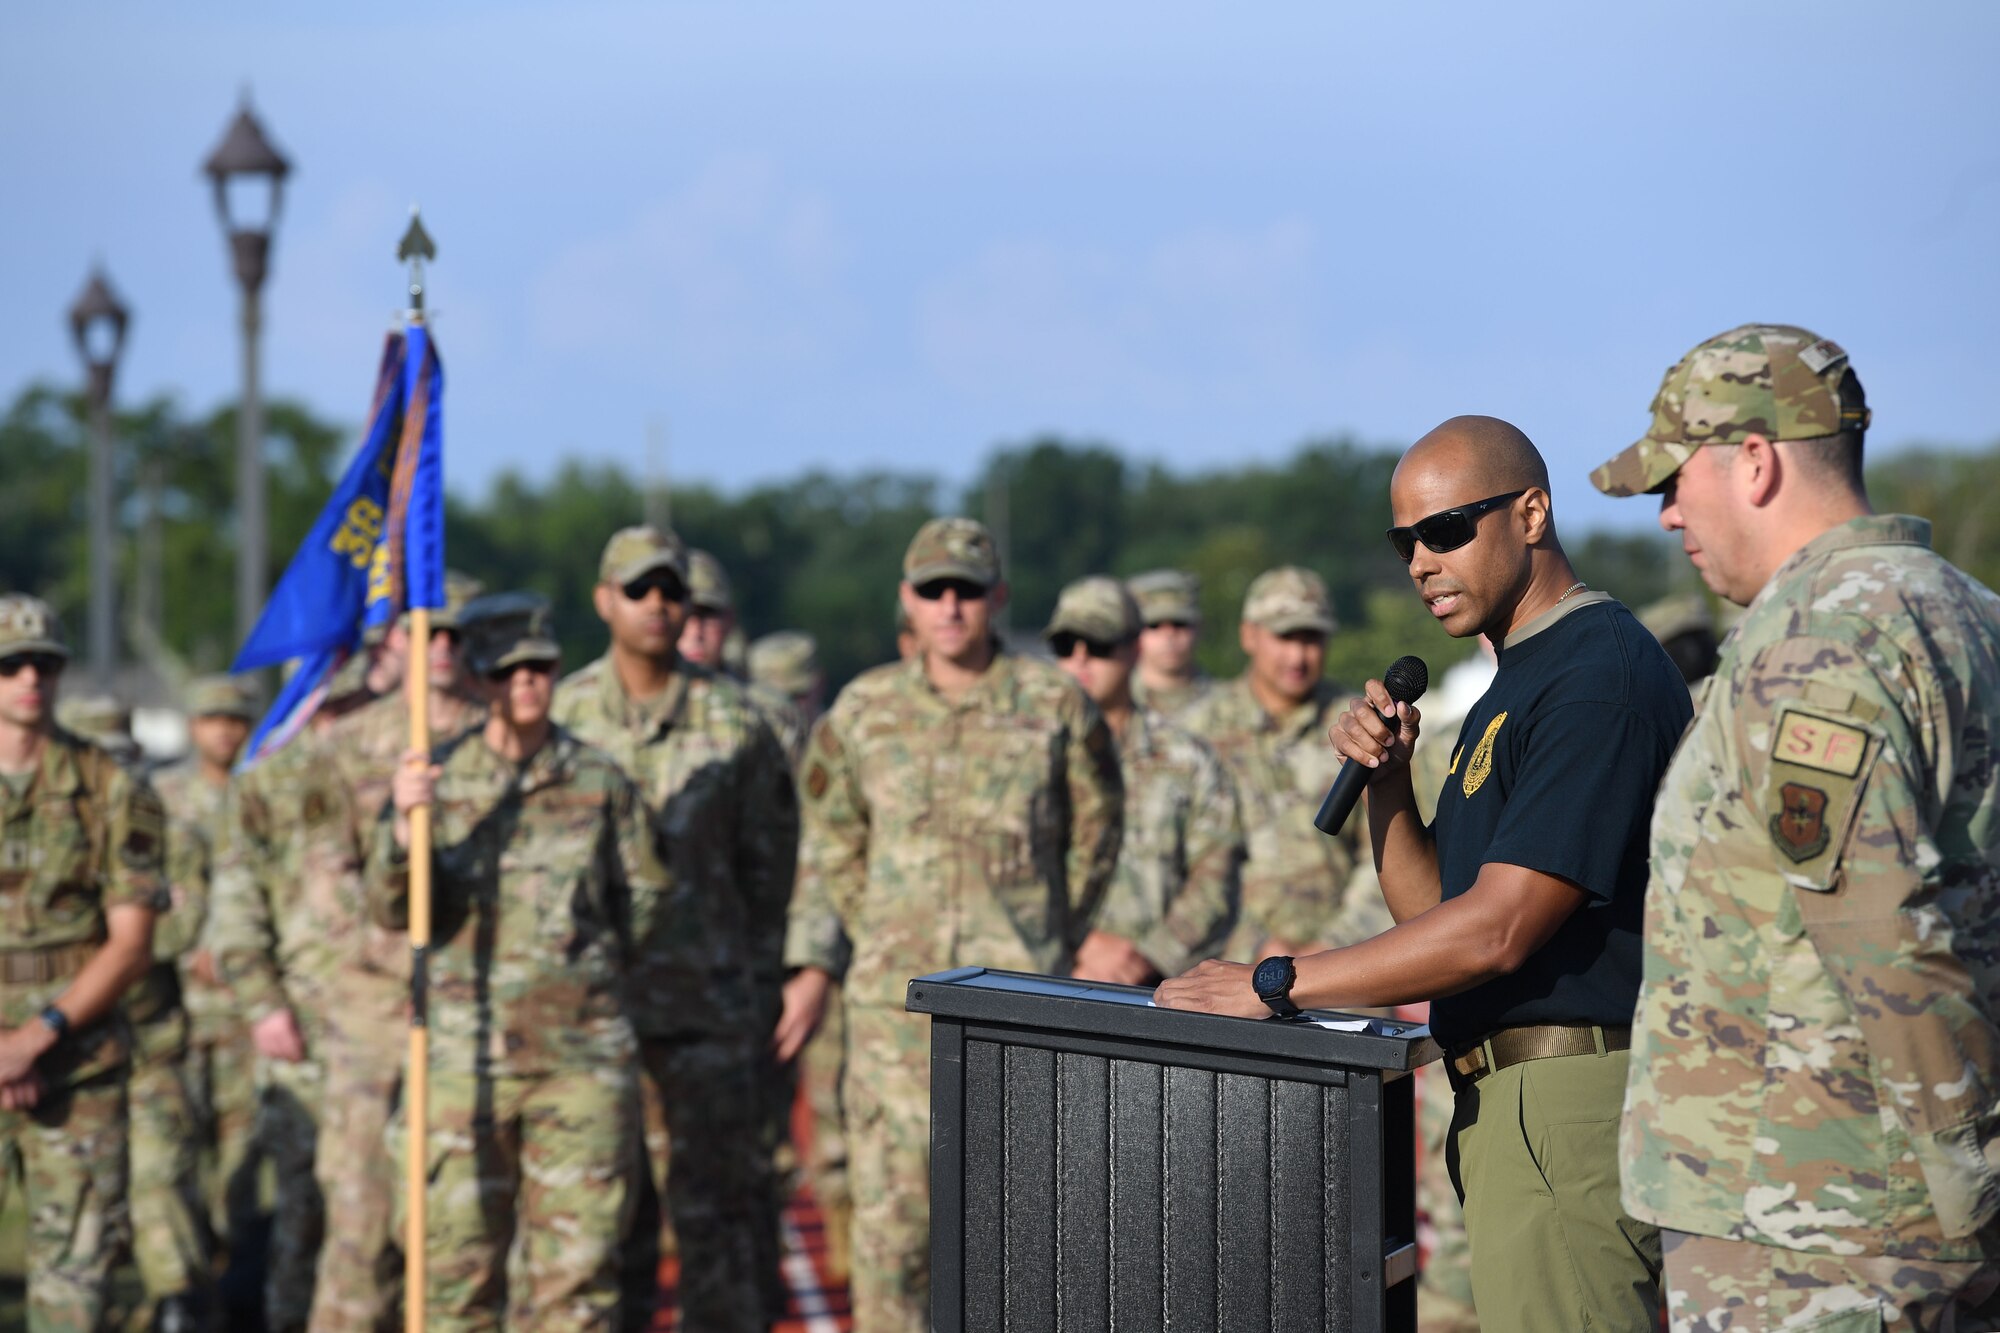 U.S. Air Force Special Agent Shannon Robinson, Office of Special Investigations Detachment 407 commander, reads the names of fallen law enforcement members during the Police Week ruck march on the triangle track at Keesler Air Force Base, Mississippi, May 16, 2022. The event was held during National Police Week, recognizing the men and women in law enforcement. (U.S. Air Force photo by Kemberly Groue)